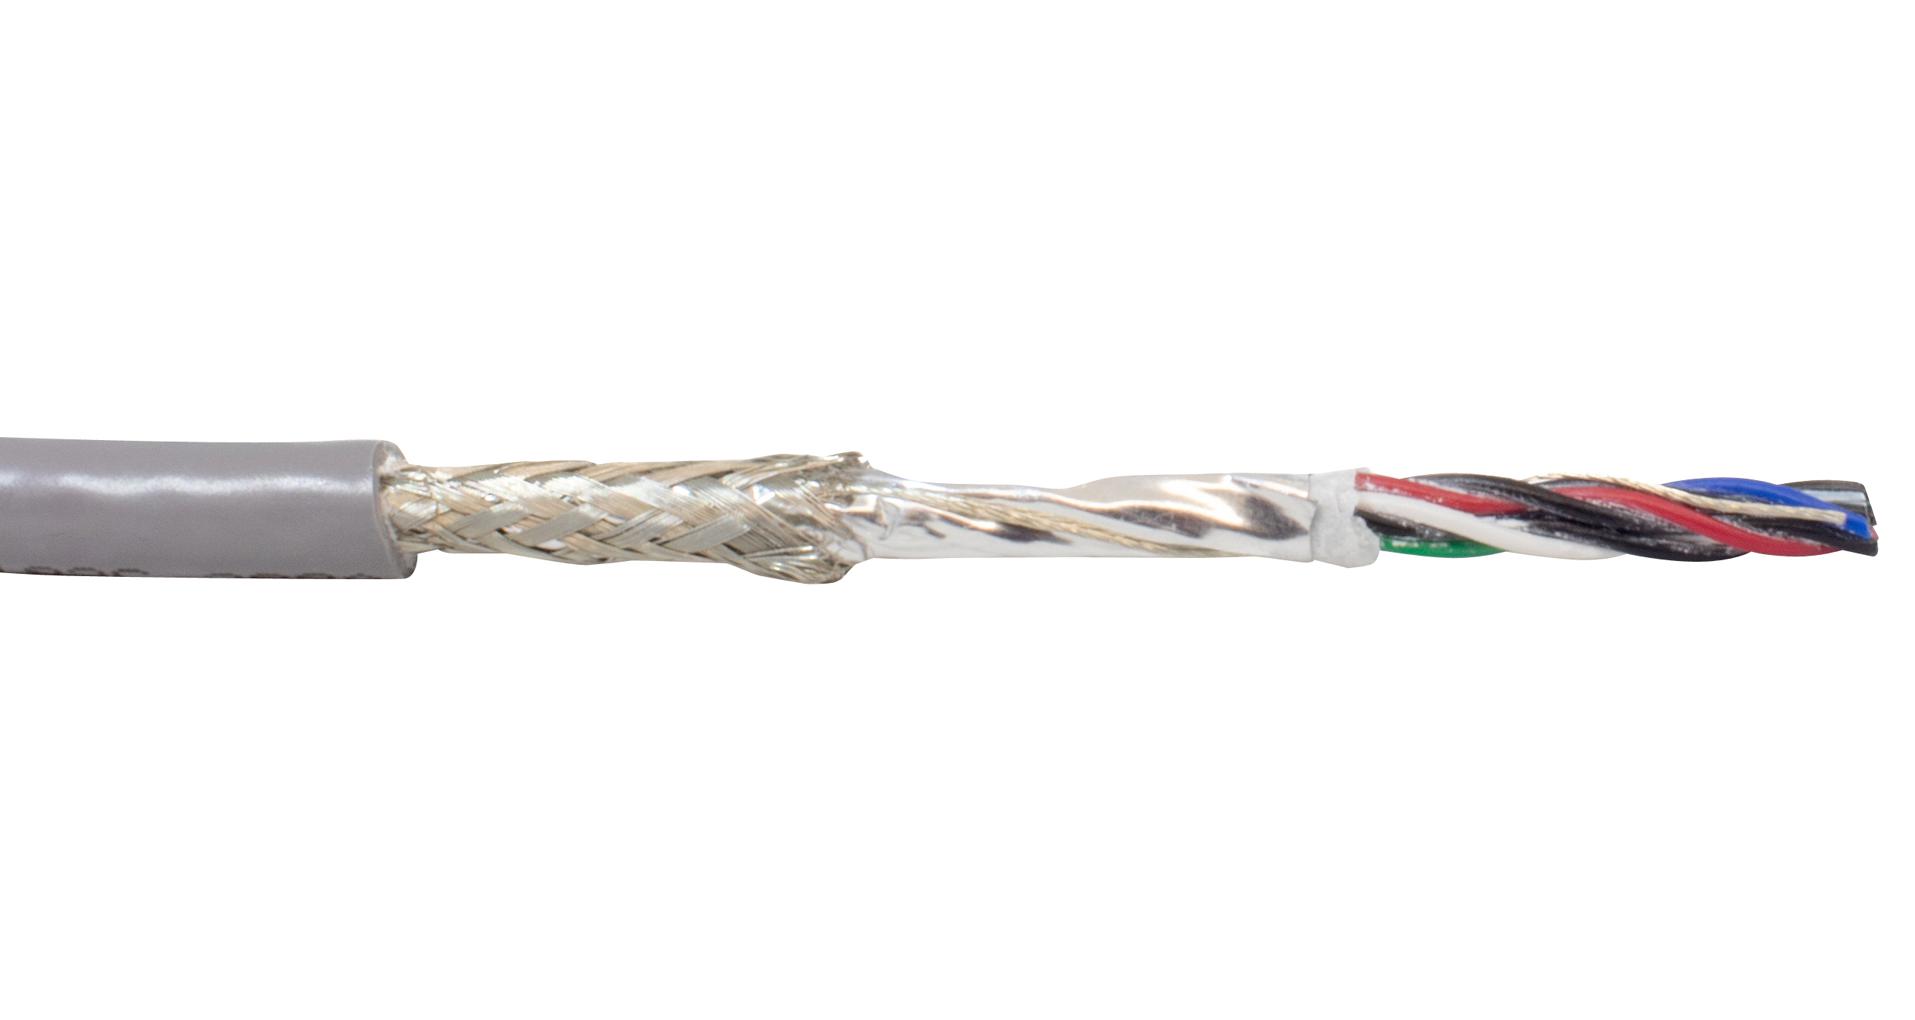 86401CY SL001 SHLD MULTIPAIR, 1 PAIR, 28AWG, 305M ALPHA WIRE